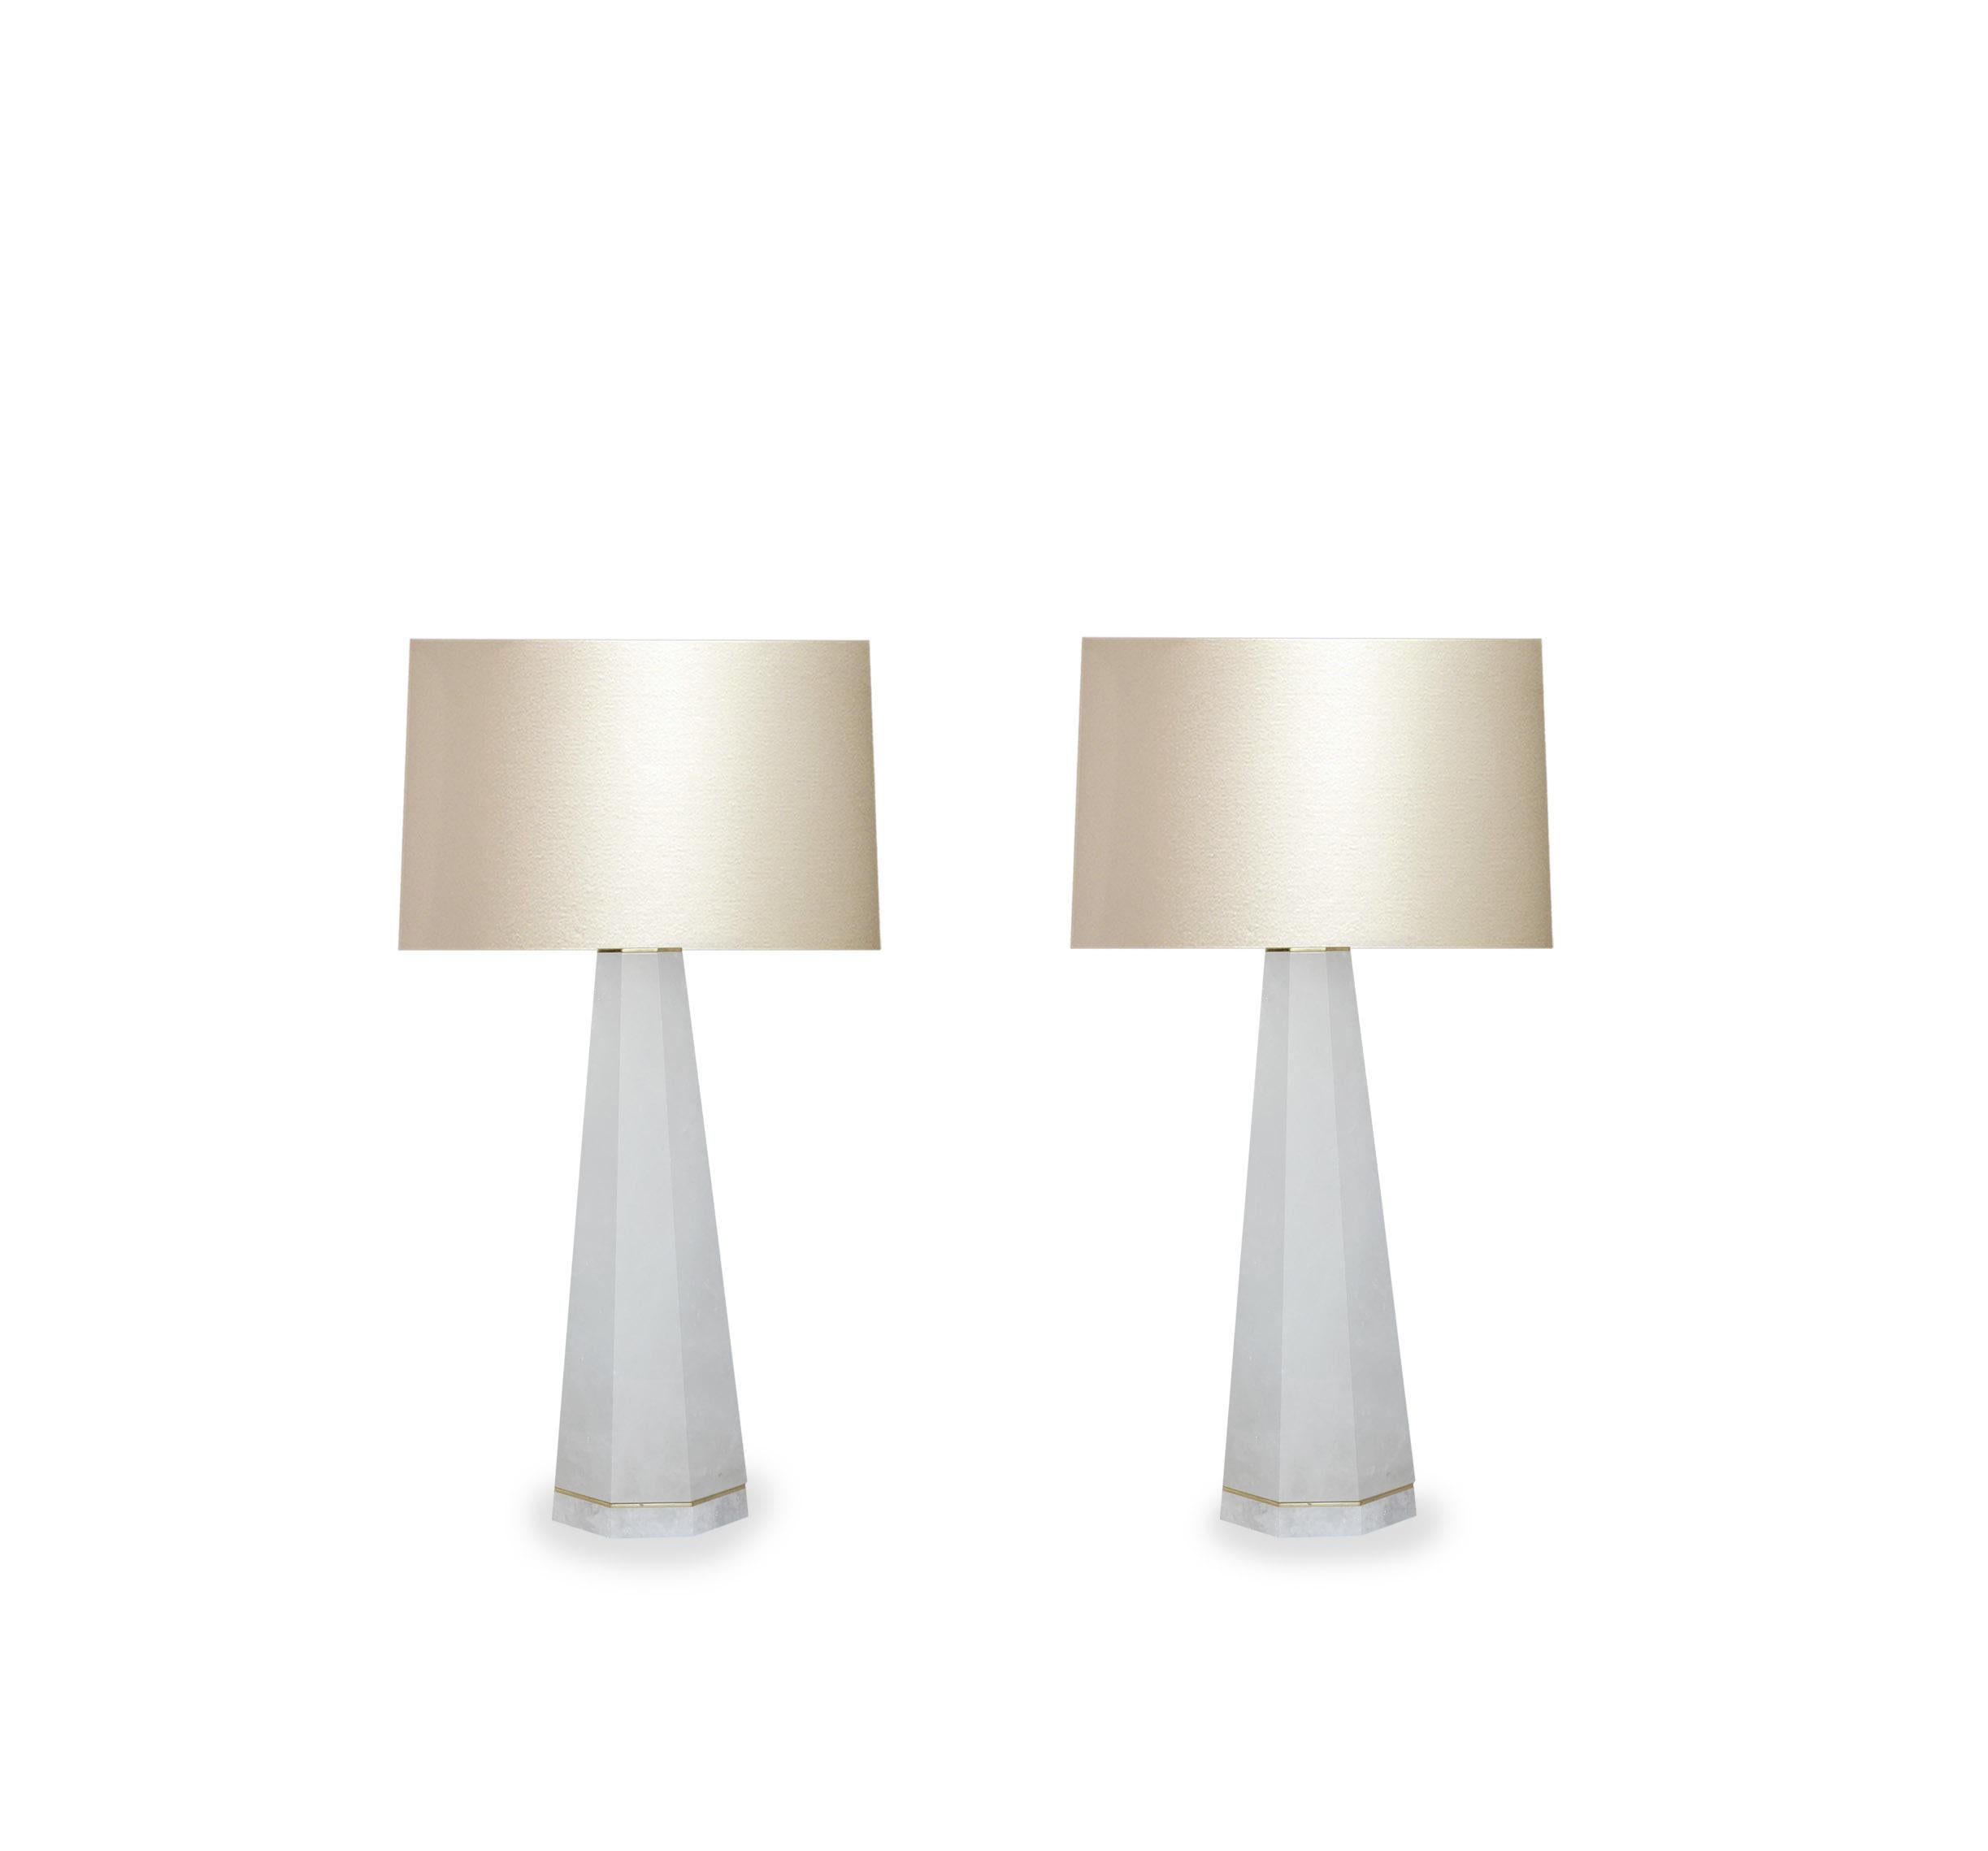 Pair of column rock crystal quartz lamps with polished brass decoration. Created by Phoenix Gallery, NYC.
Measure: To the top of rock crystal 19.5